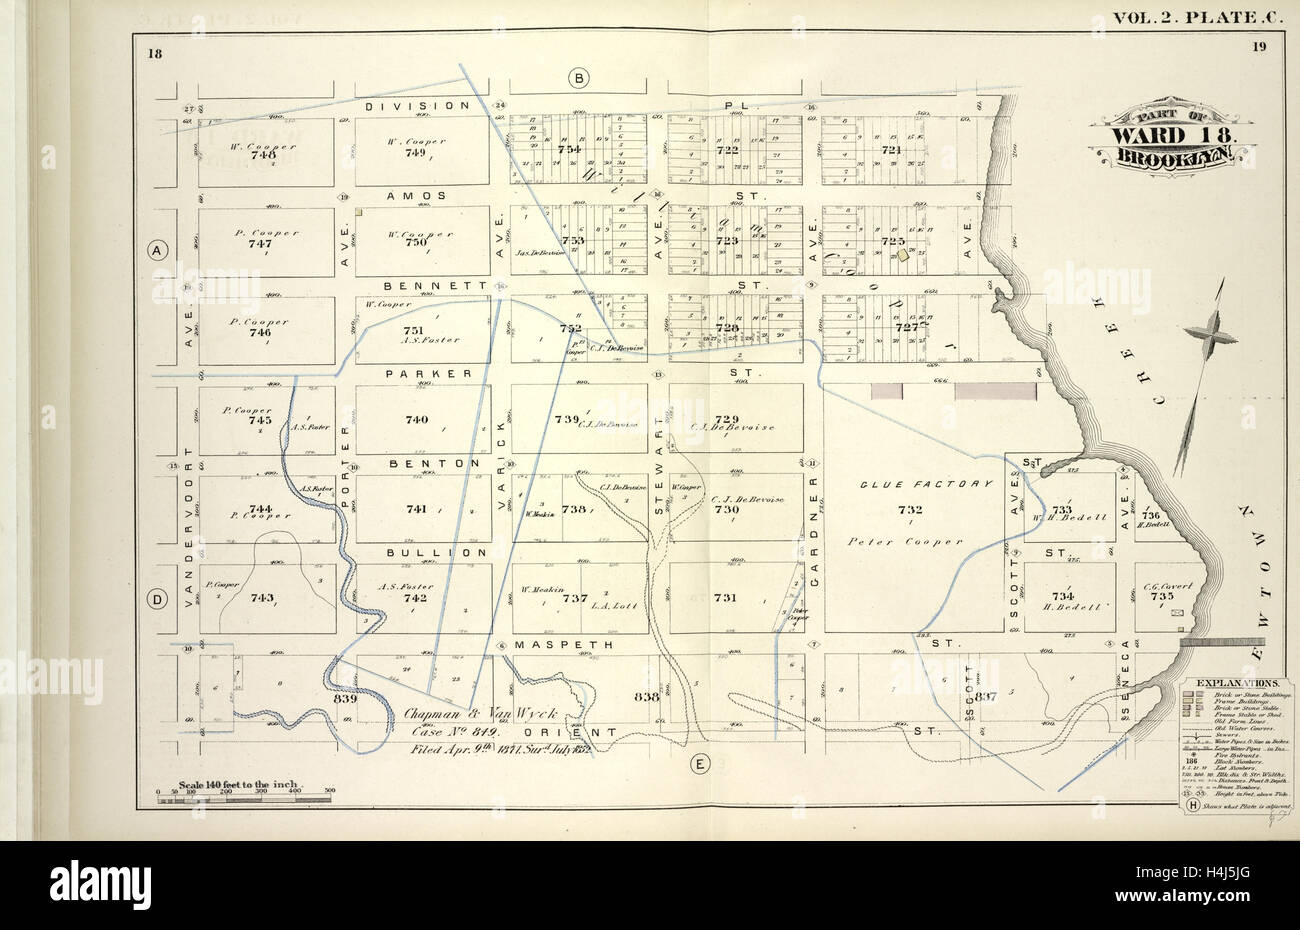 Vol. 2. Plate, C. Map bound by Division Pl., Newtown Creek, Orient  St., Vandervoort Ave.; Including Amos St., Bennett St. Stock Photo